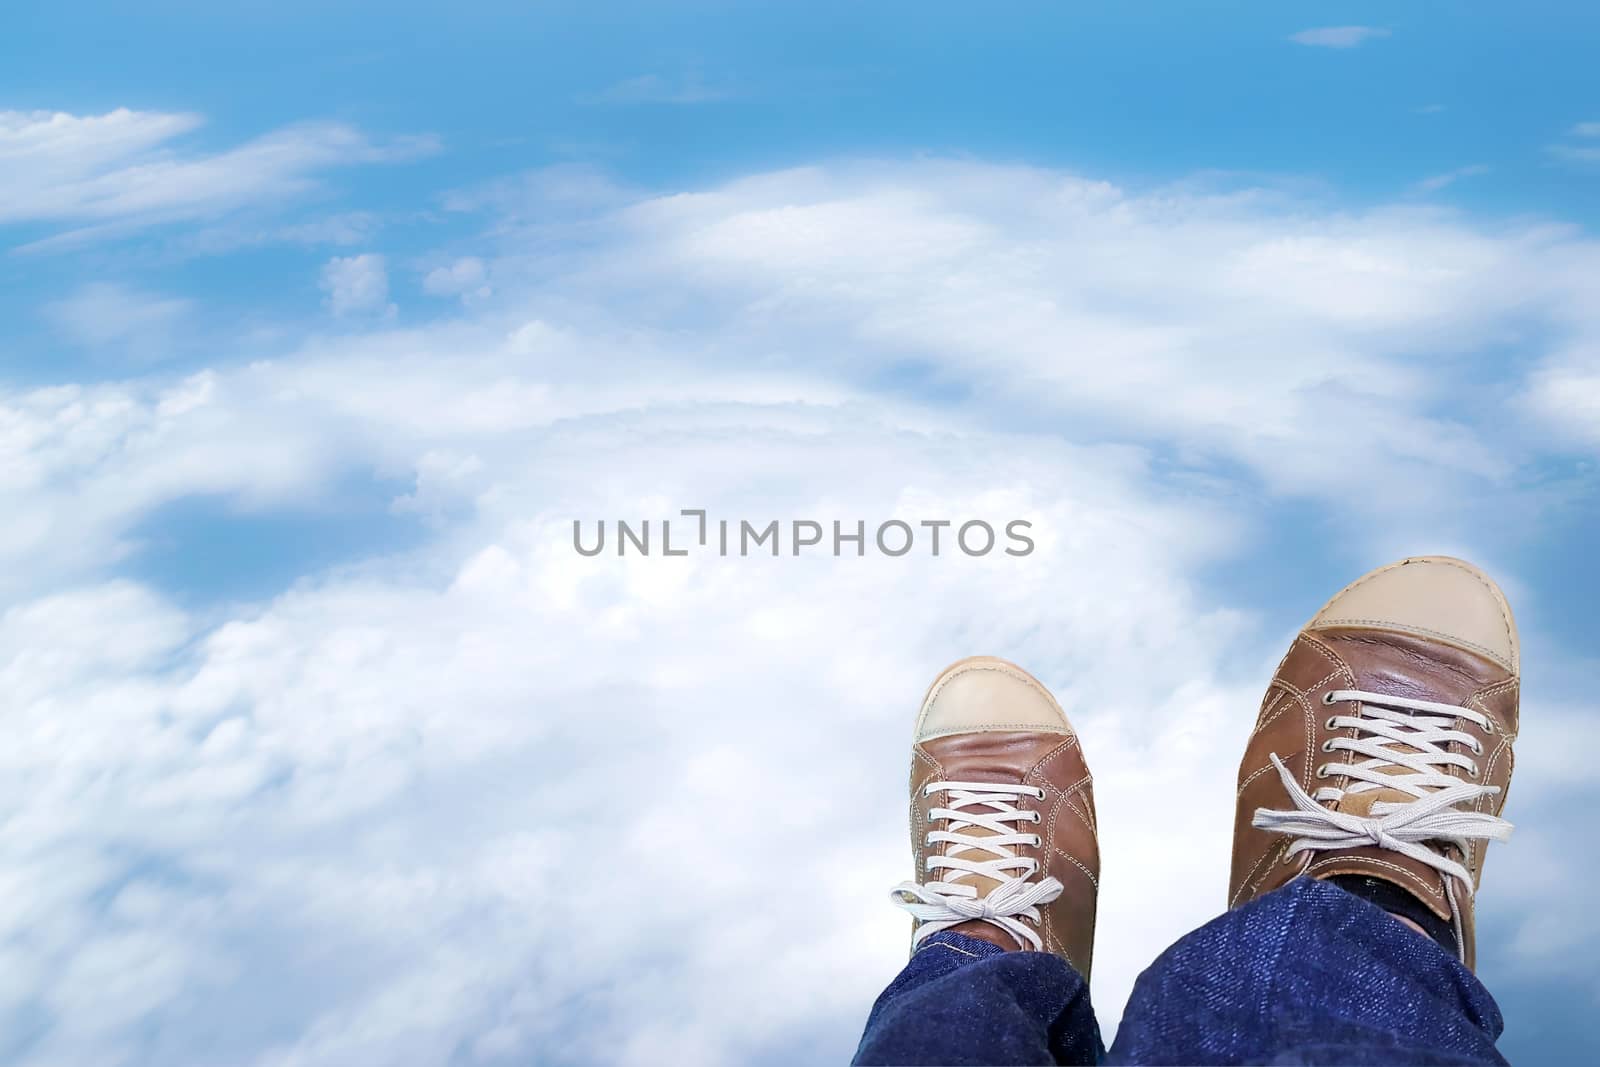 Two legs of the men wore blue jeans statements and brown leather shoes with clouds sky background.